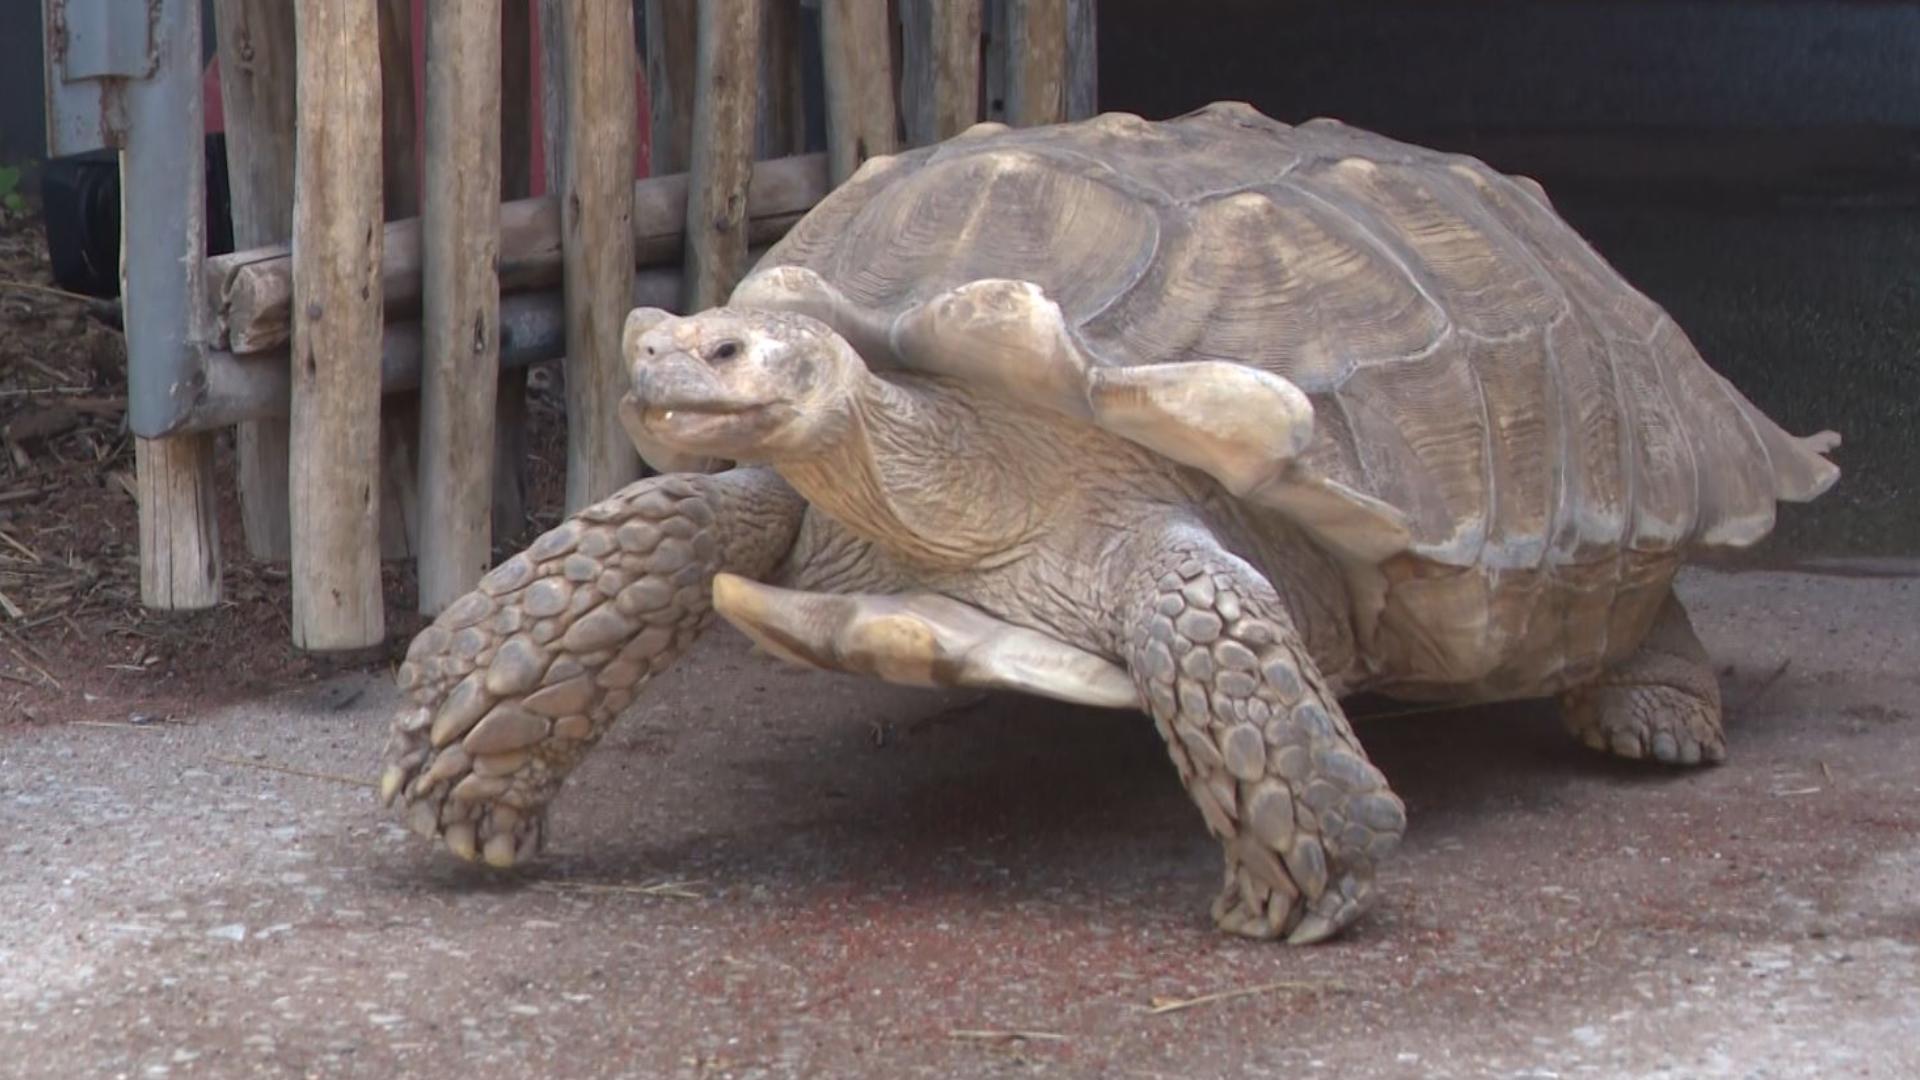 Spike the tortoise set a personal record for how quickly he was able to walk from his enclosure to his summer home at the Louisville Zoo.